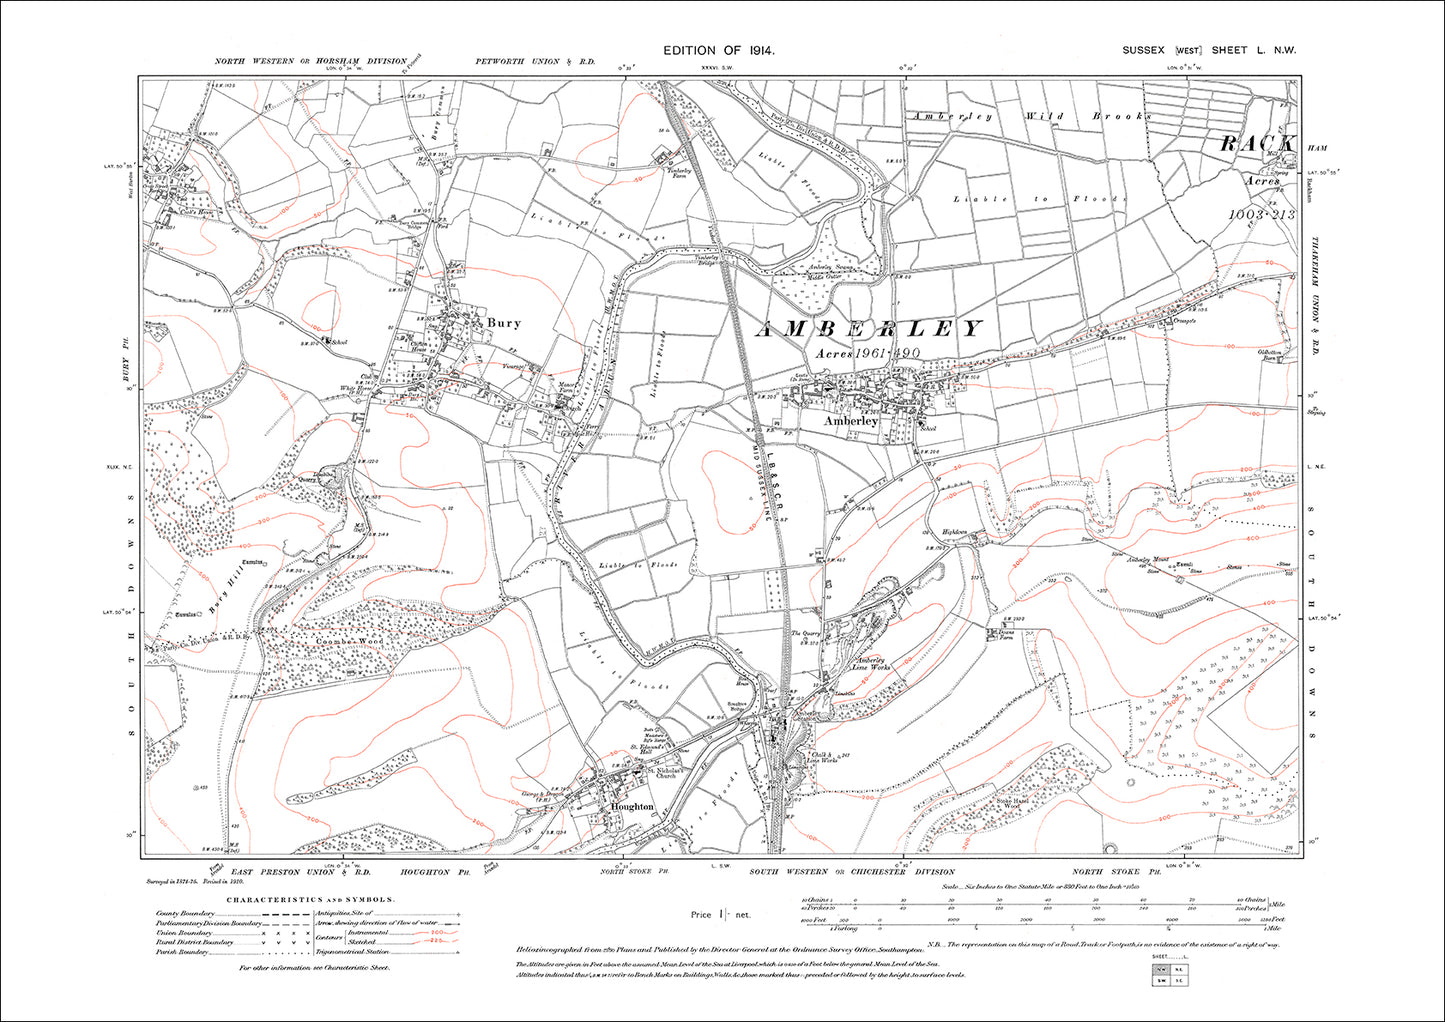 Amberley, Bury, Houghton, West Burton (east), old map Sussex 1914: 50NW